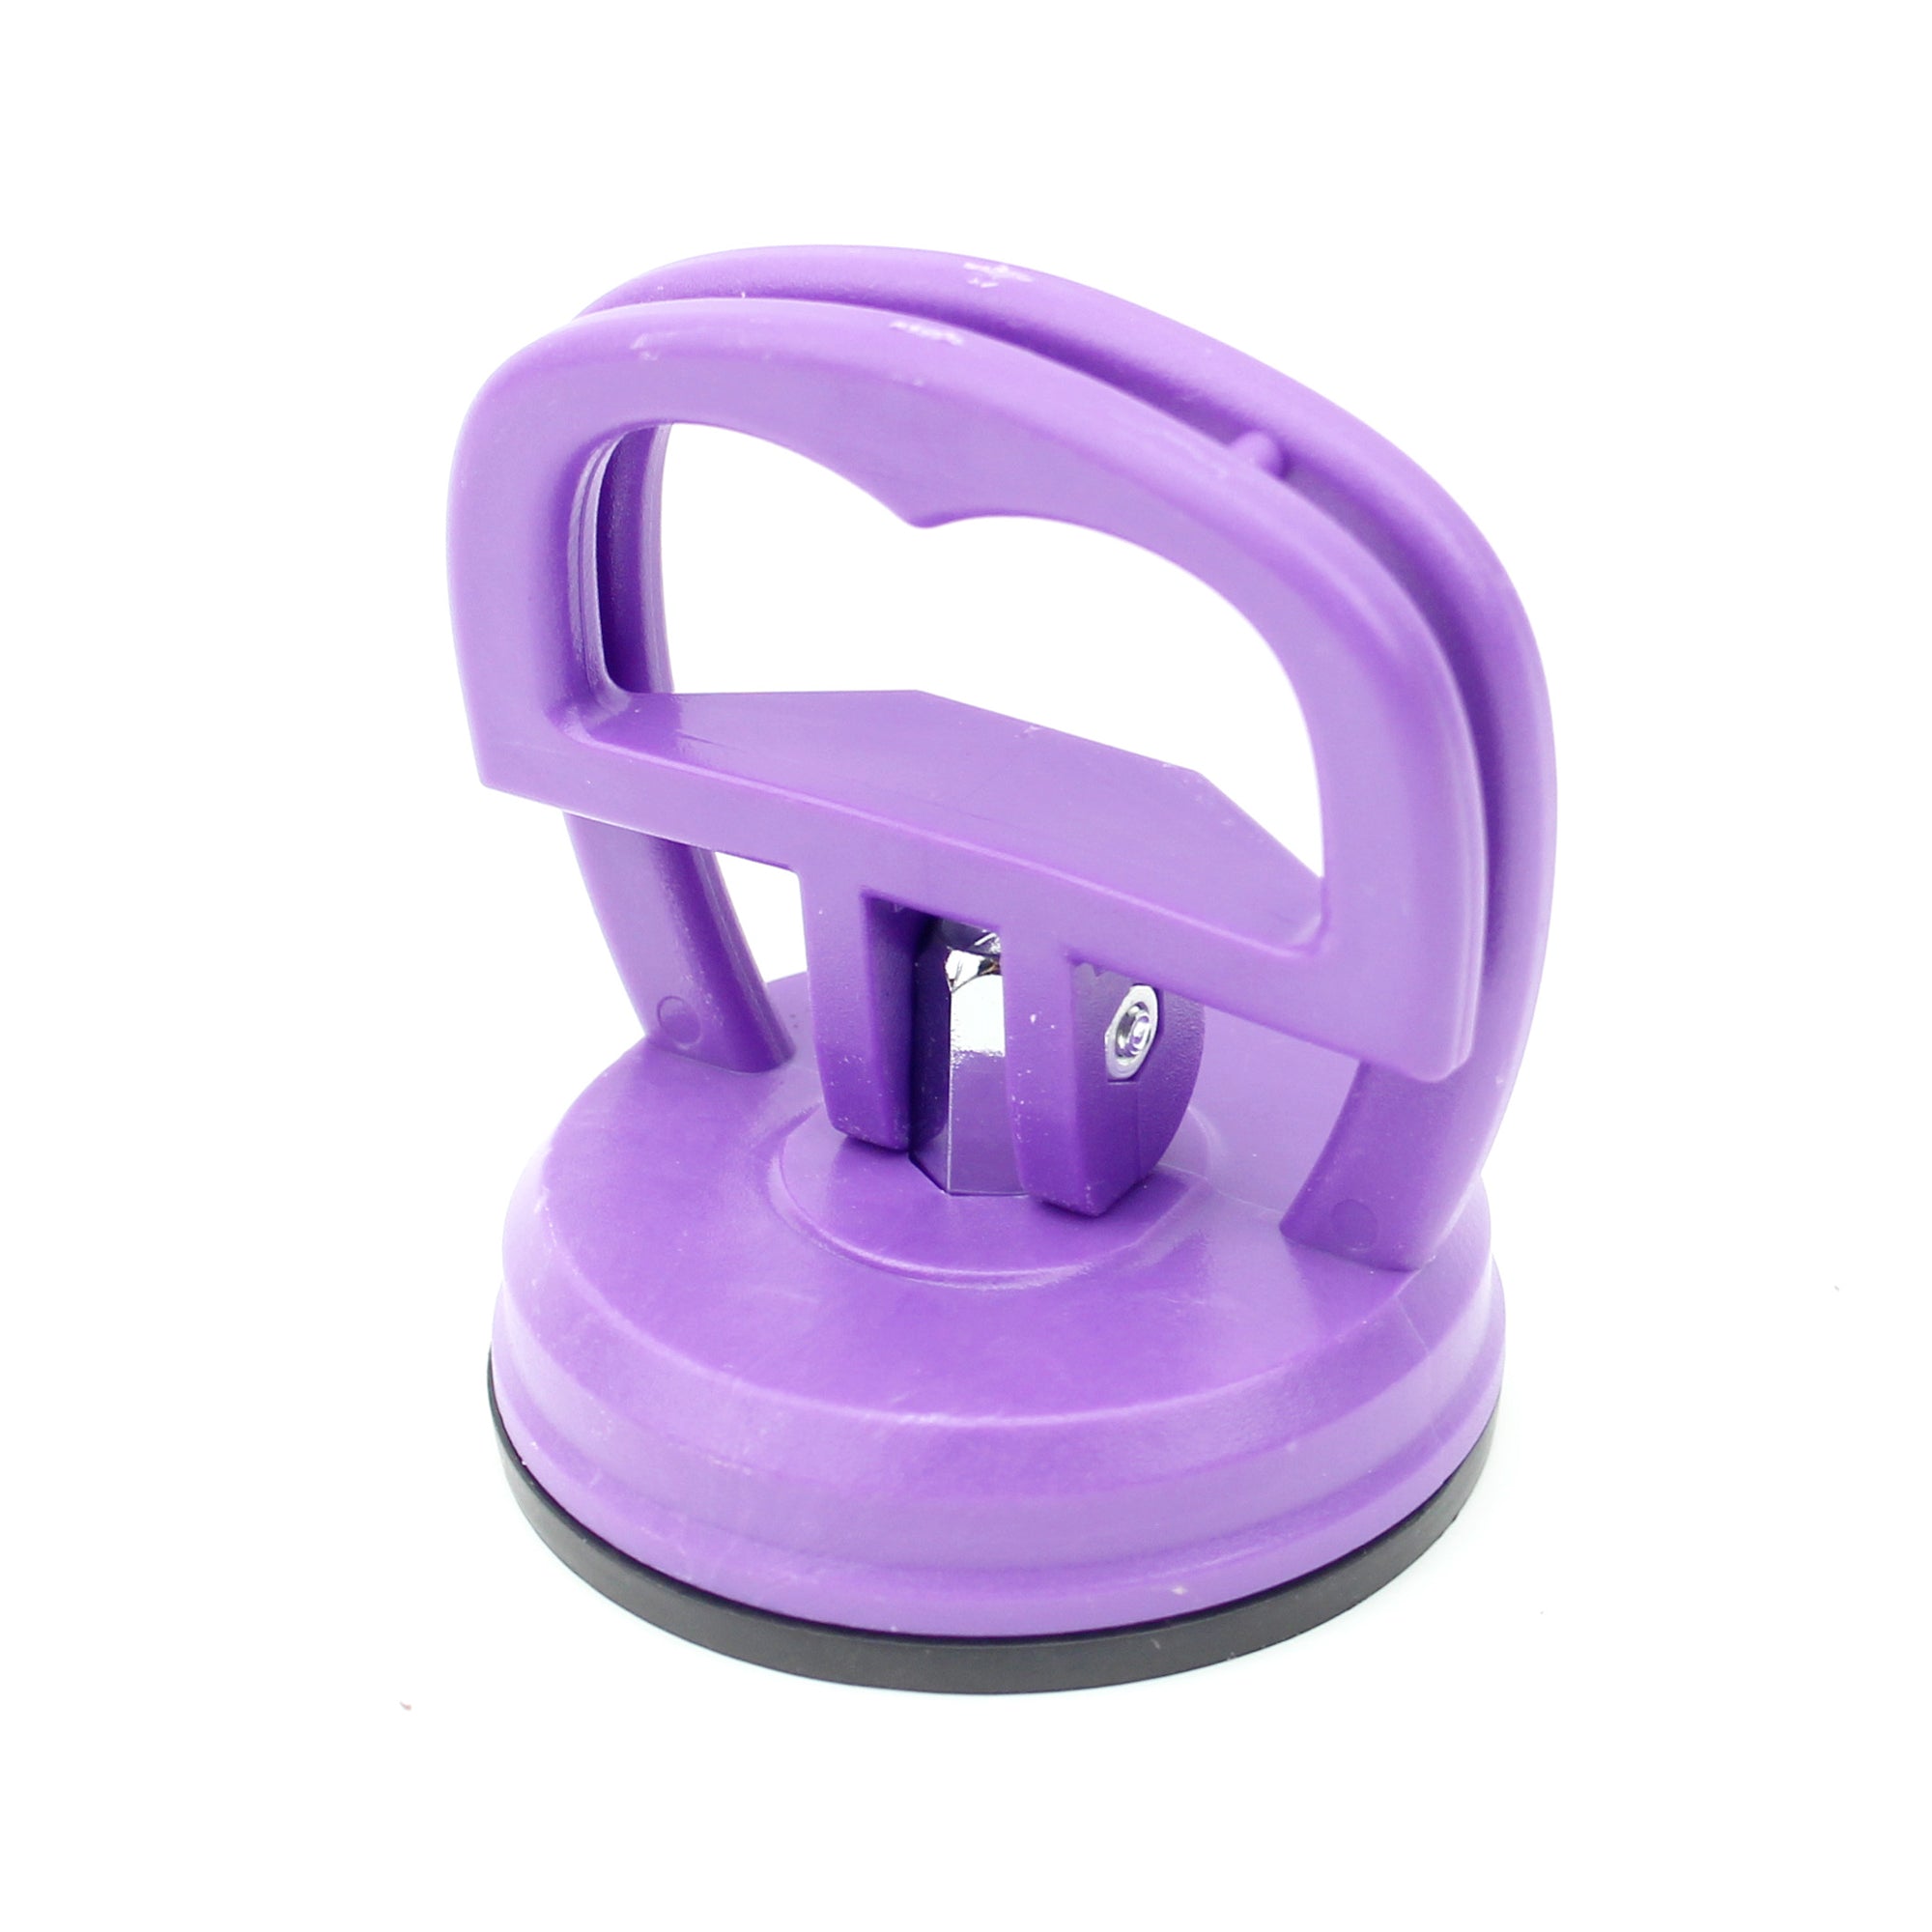 P8822 Powerful Suction Cup Dent Puller Repair Tool with Handle - Purple